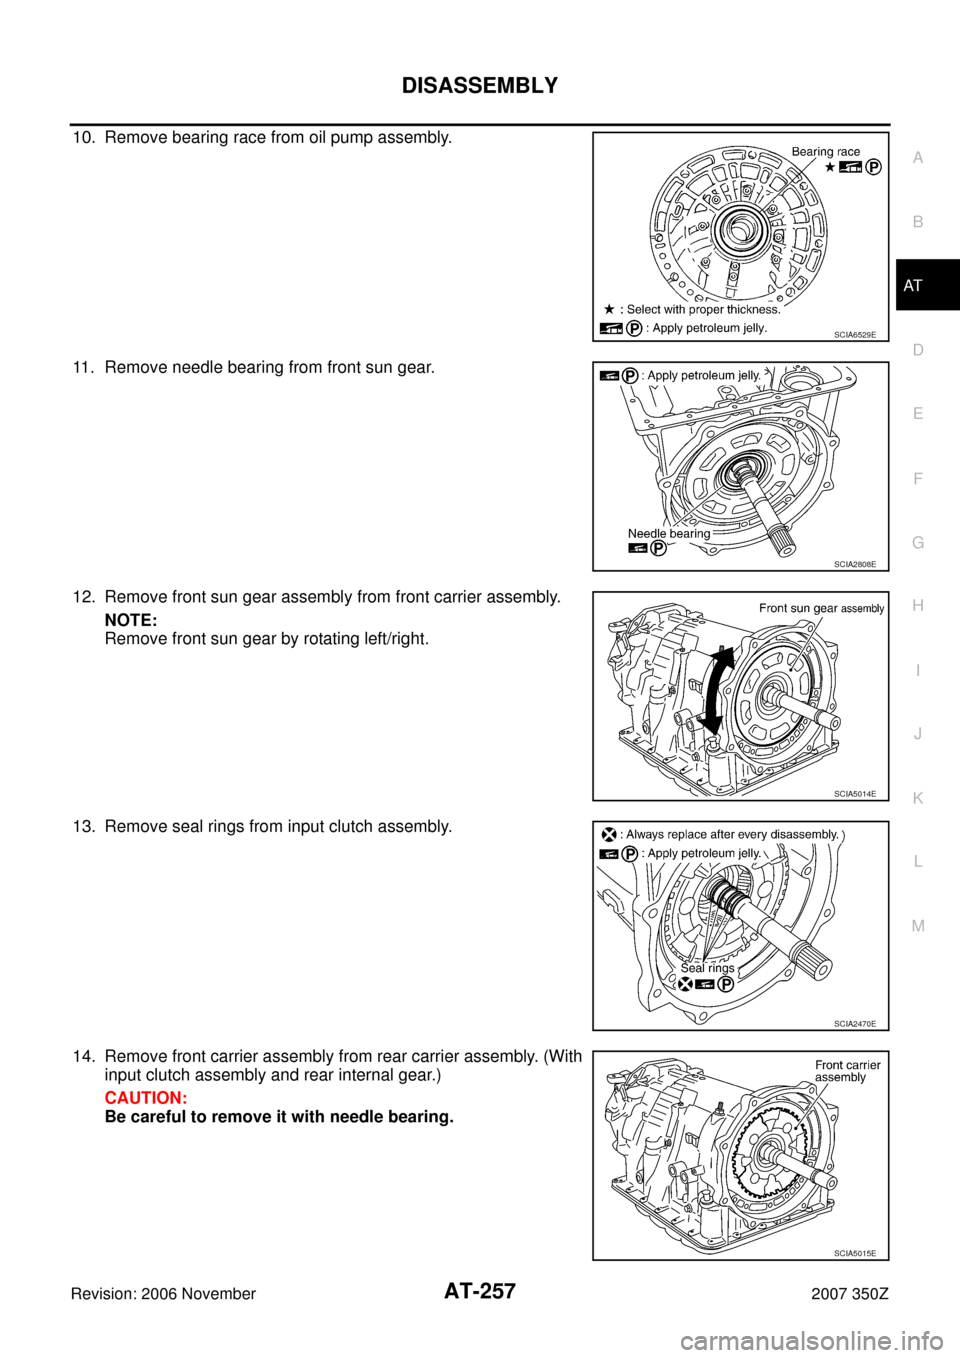 NISSAN 350Z 2007 Z33 Automatic Transmission Workshop Manual DISASSEMBLY
AT-257
D
E
F
G
H
I
J
K
L
MA
B
AT
Revision: 2006 November2007 350Z
10. Remove bearing race from oil pump assembly.
11. Remove needle bearing from front sun gear.
12. Remove front sun gear a